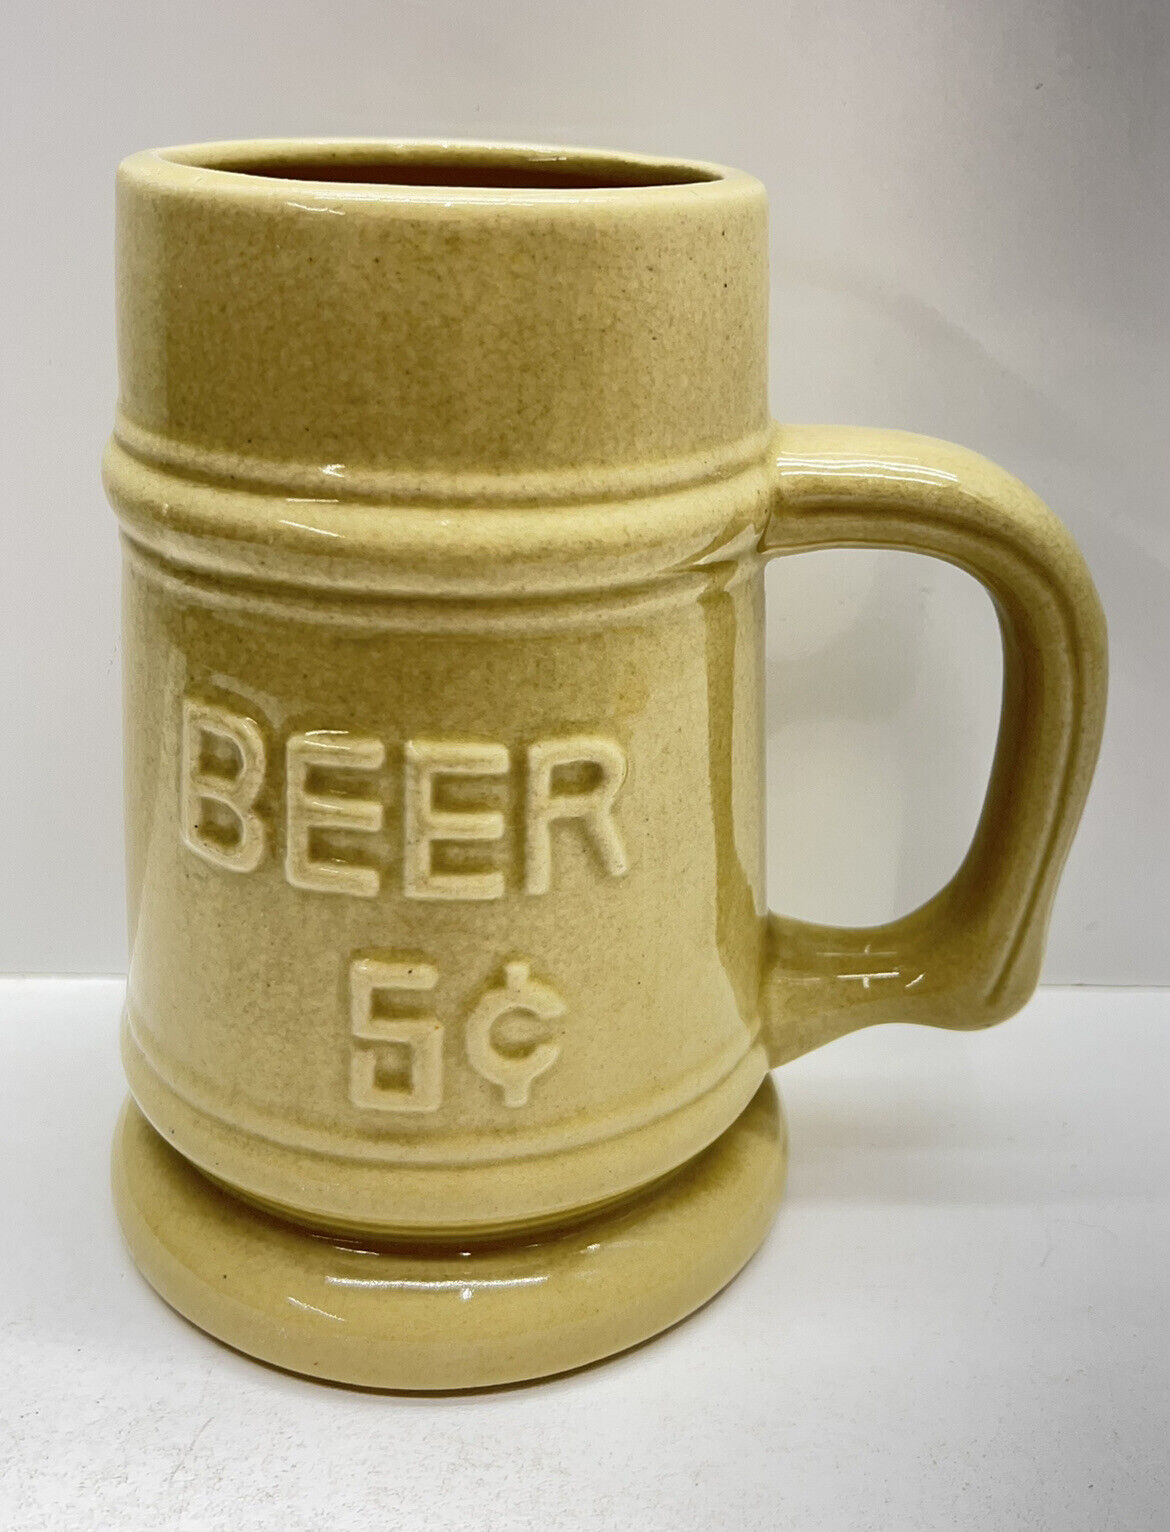 Col. I. Conk Calif USA Beer 5 cents Cream Pottery Large Mug Stein